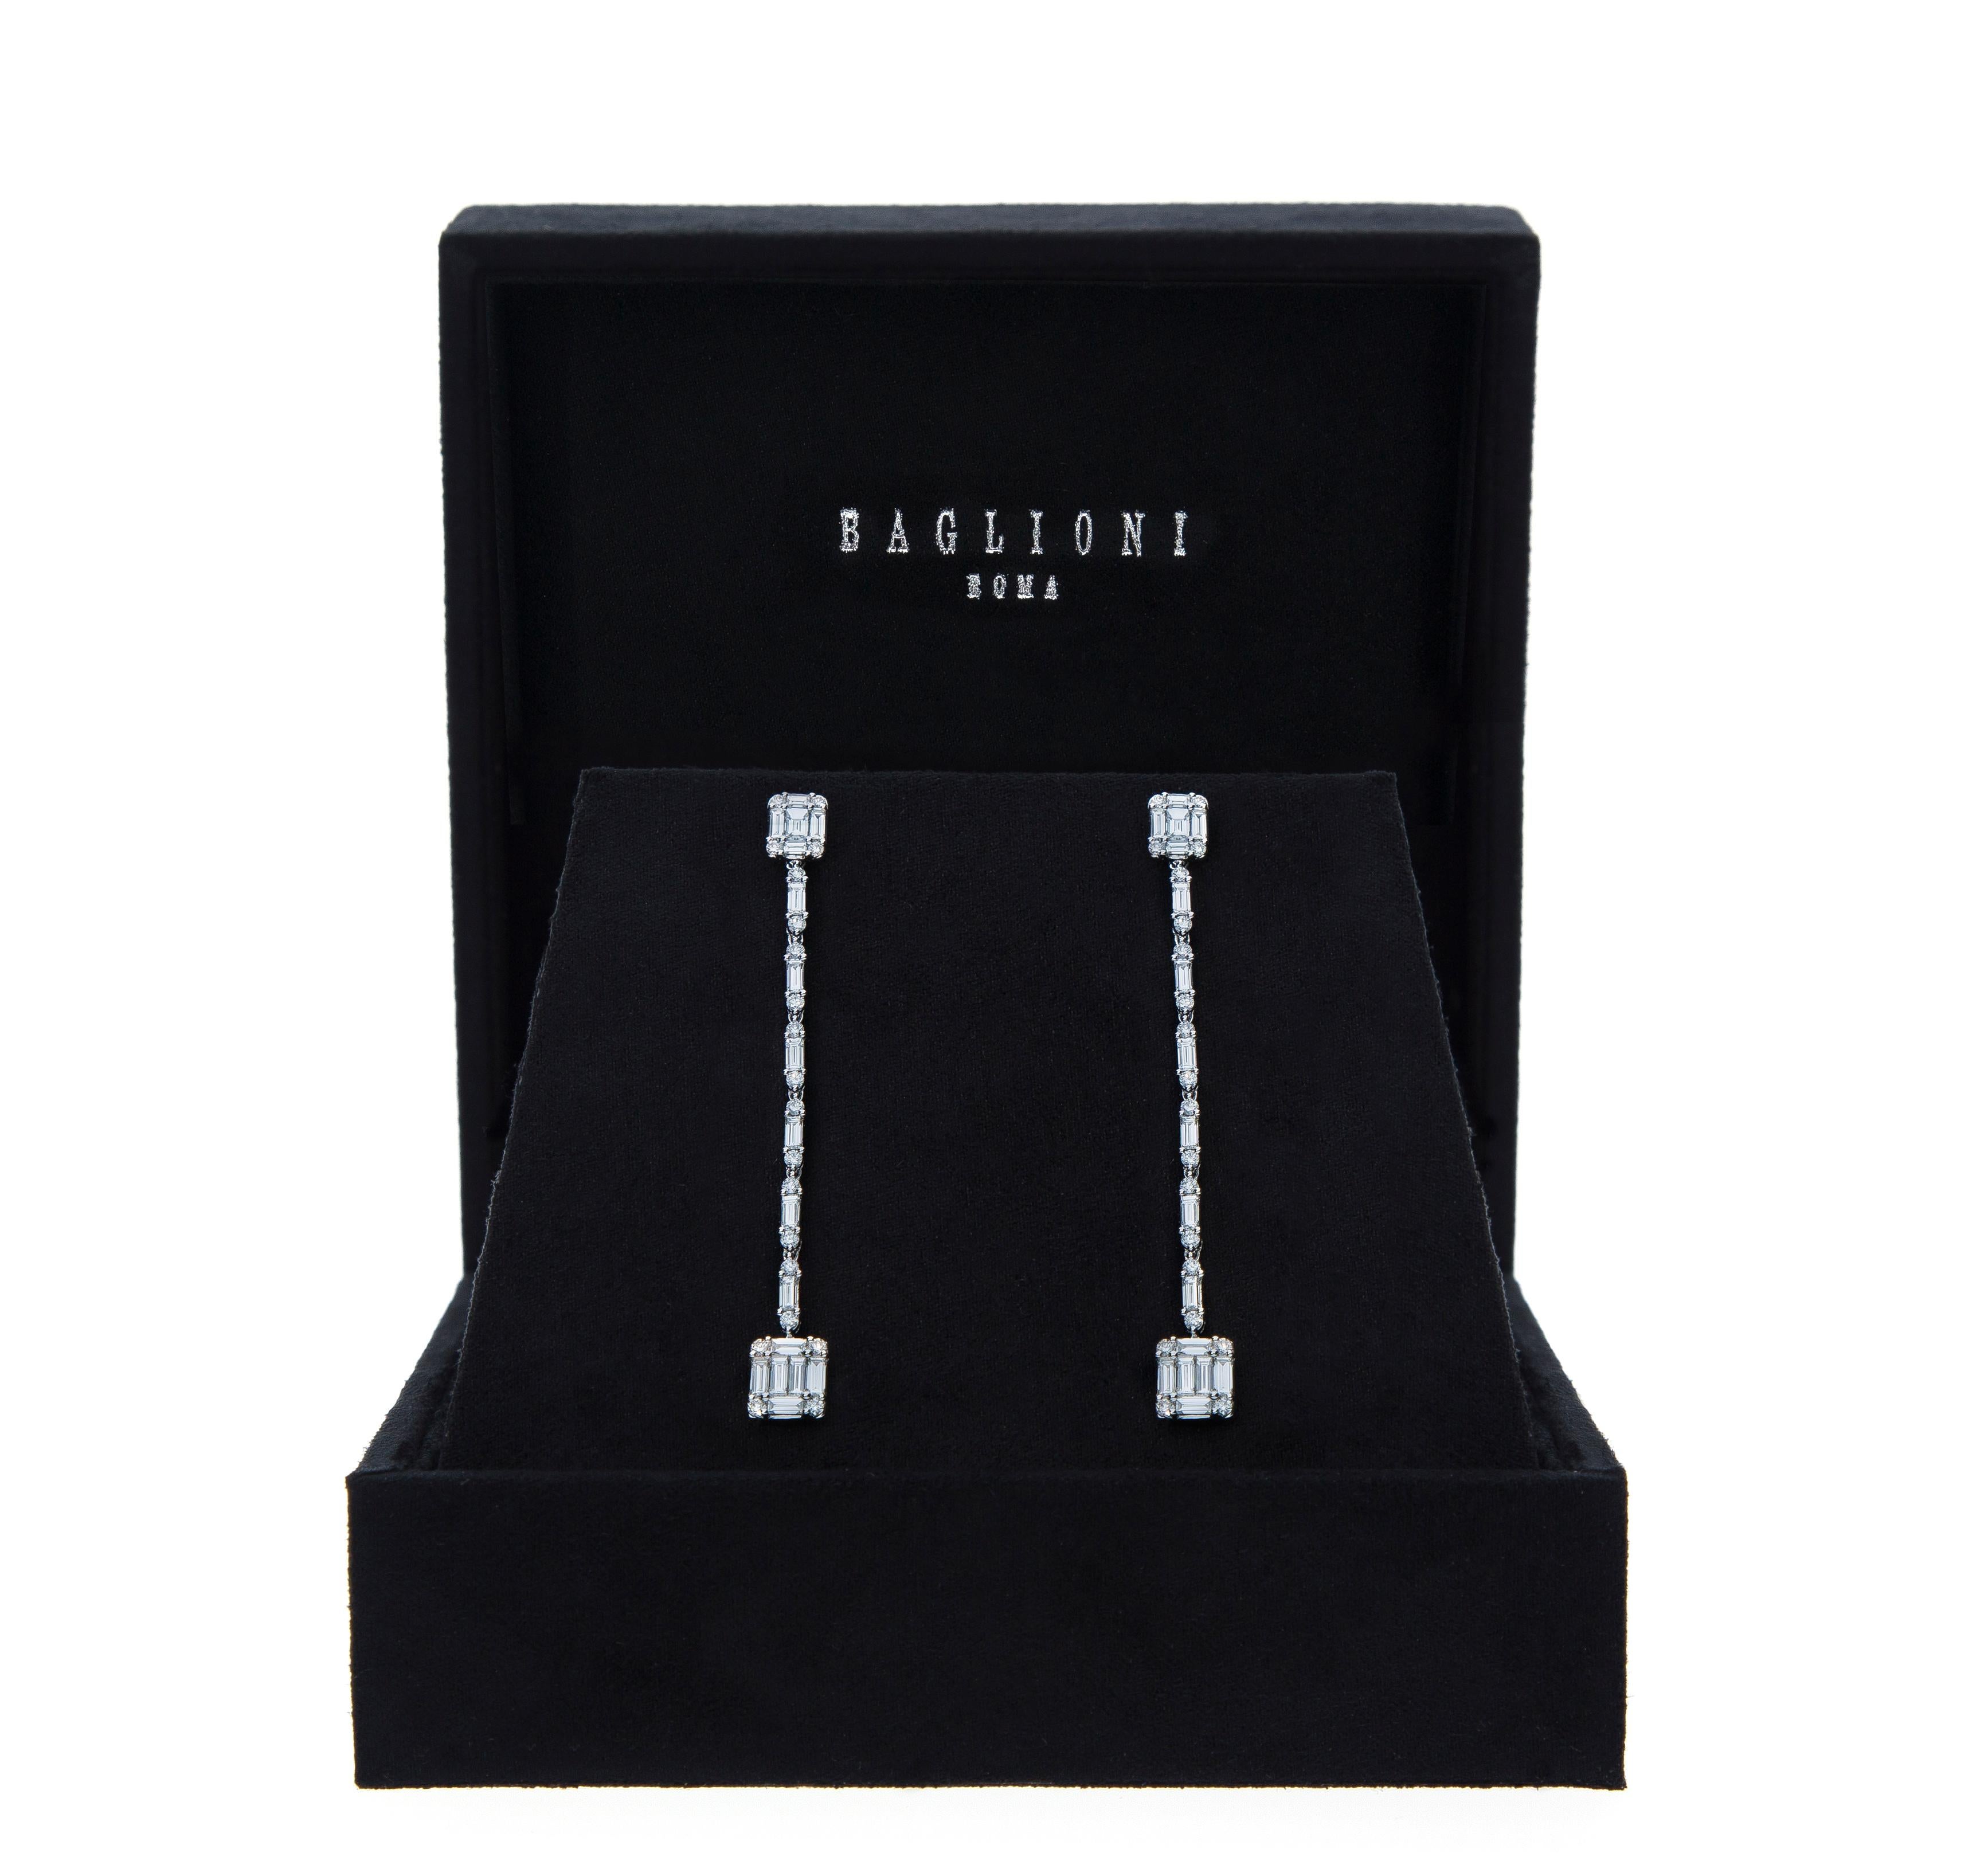 Earrings in 18kt white gold with 74 diamonds of total carat 2.22 ct. 
40 round cut diamonds total ct 0.54 
34 baguette diamonds total ct 1.68 
18kt white gold weight. grams 6.00
Each earring is composed of two upper elements in which 5 baguette-cut